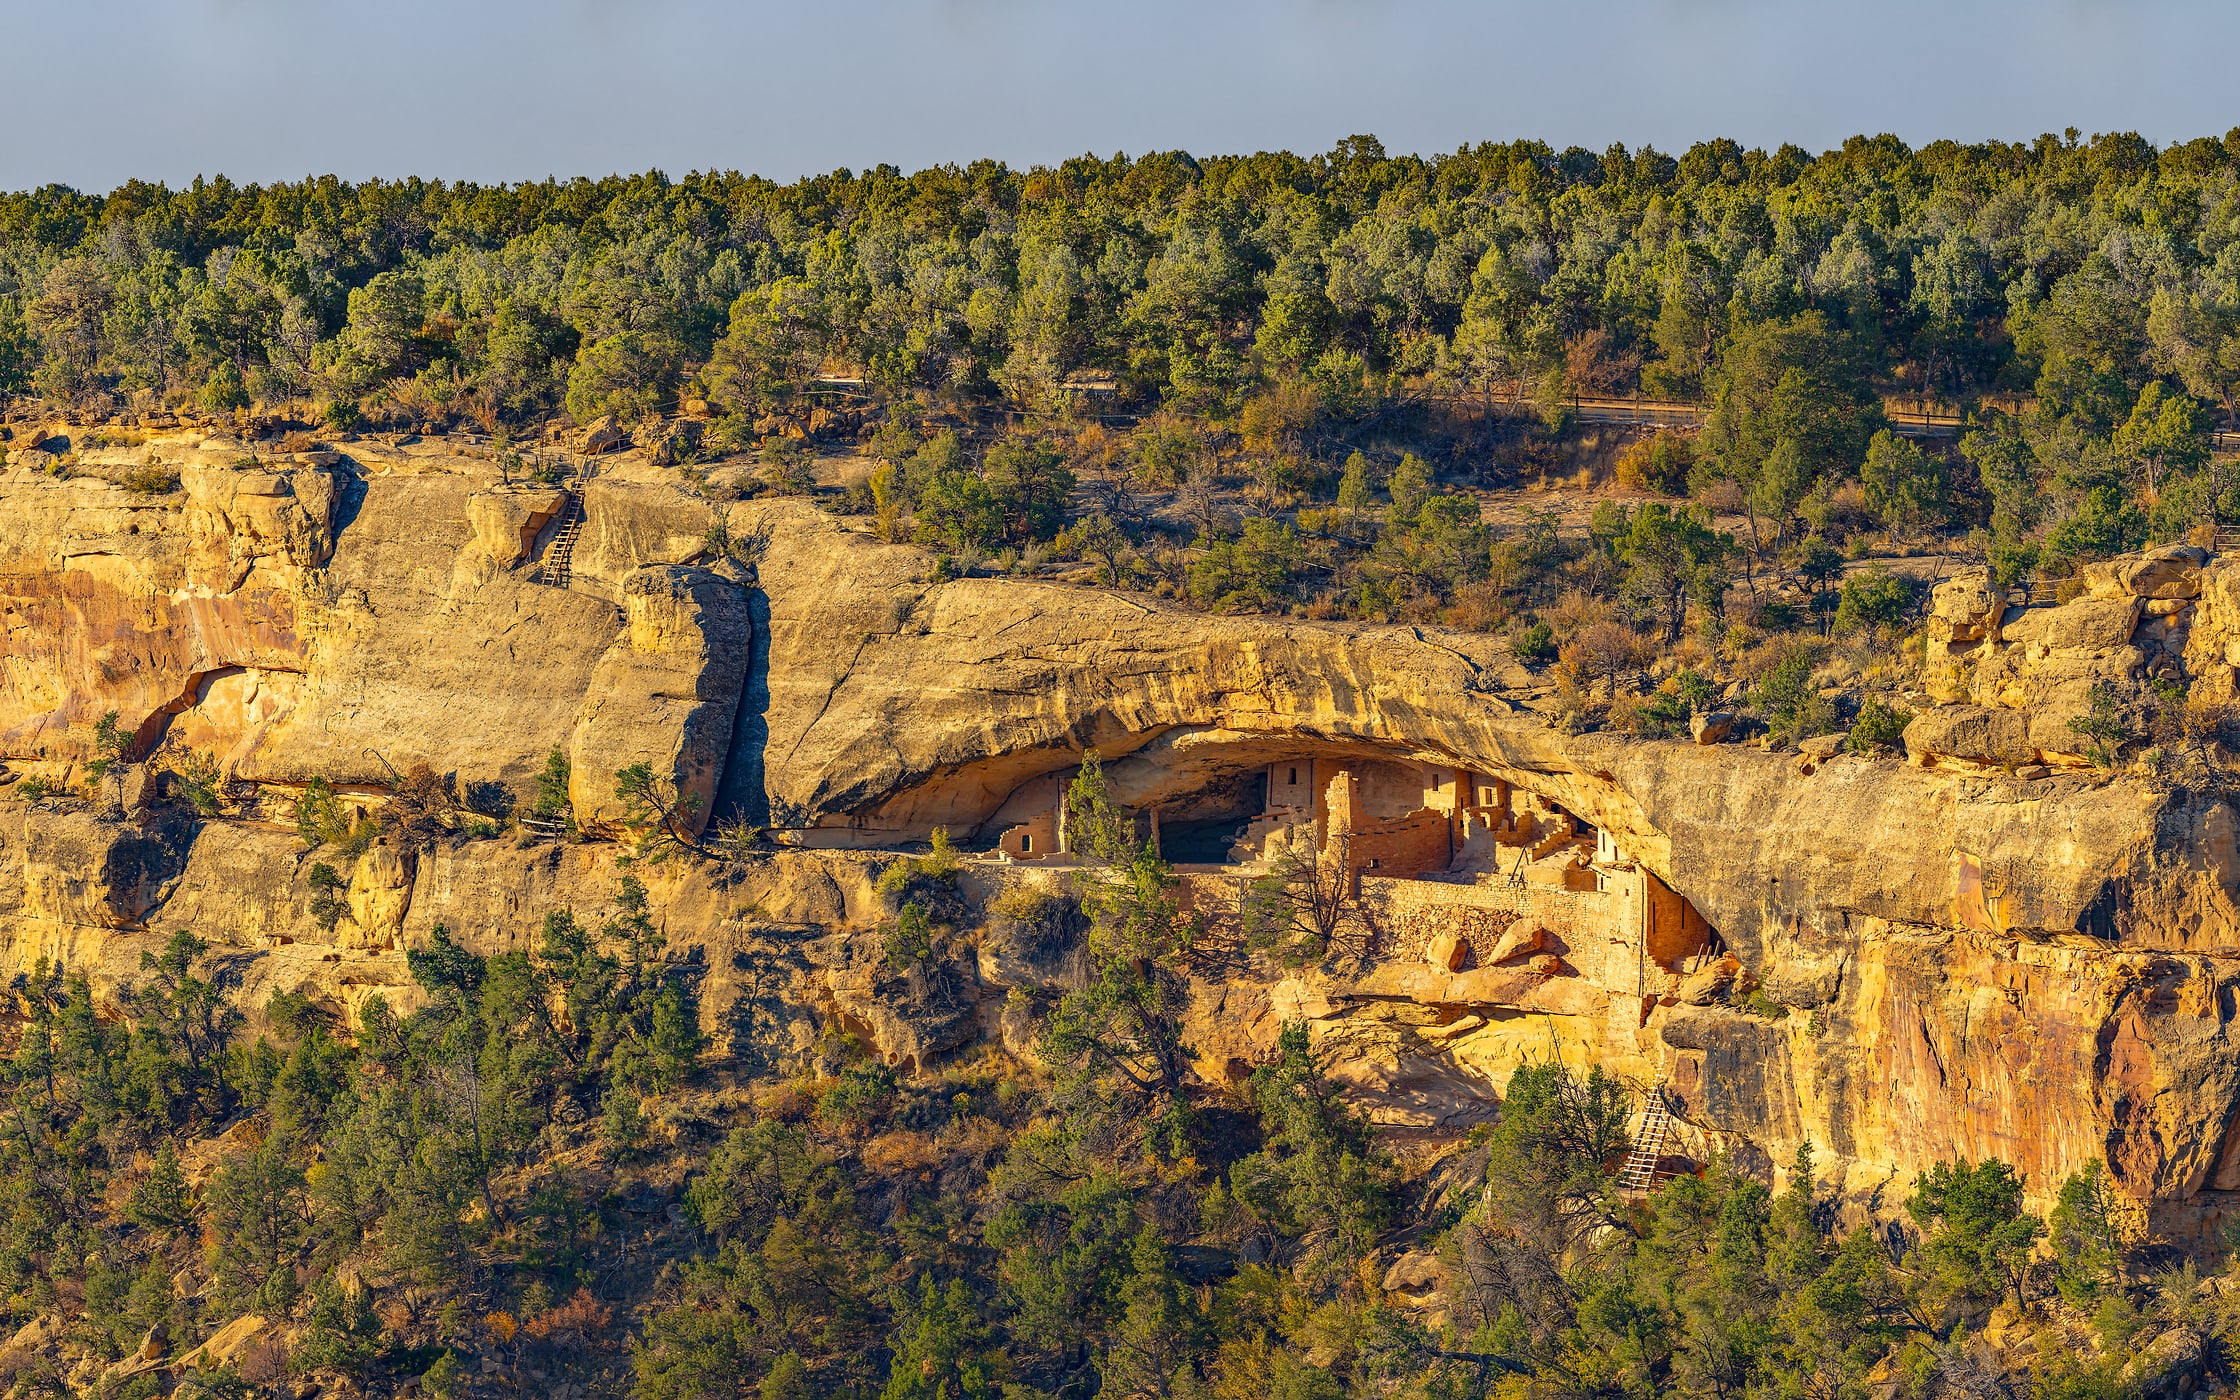 519 megapixels! A very high resolution, large-format VAST photo print of Balcony House at Mesa Verde; photograph created by John Freeman from Soda Canyon Overlook in Mesa Verde National Park, Colorado.